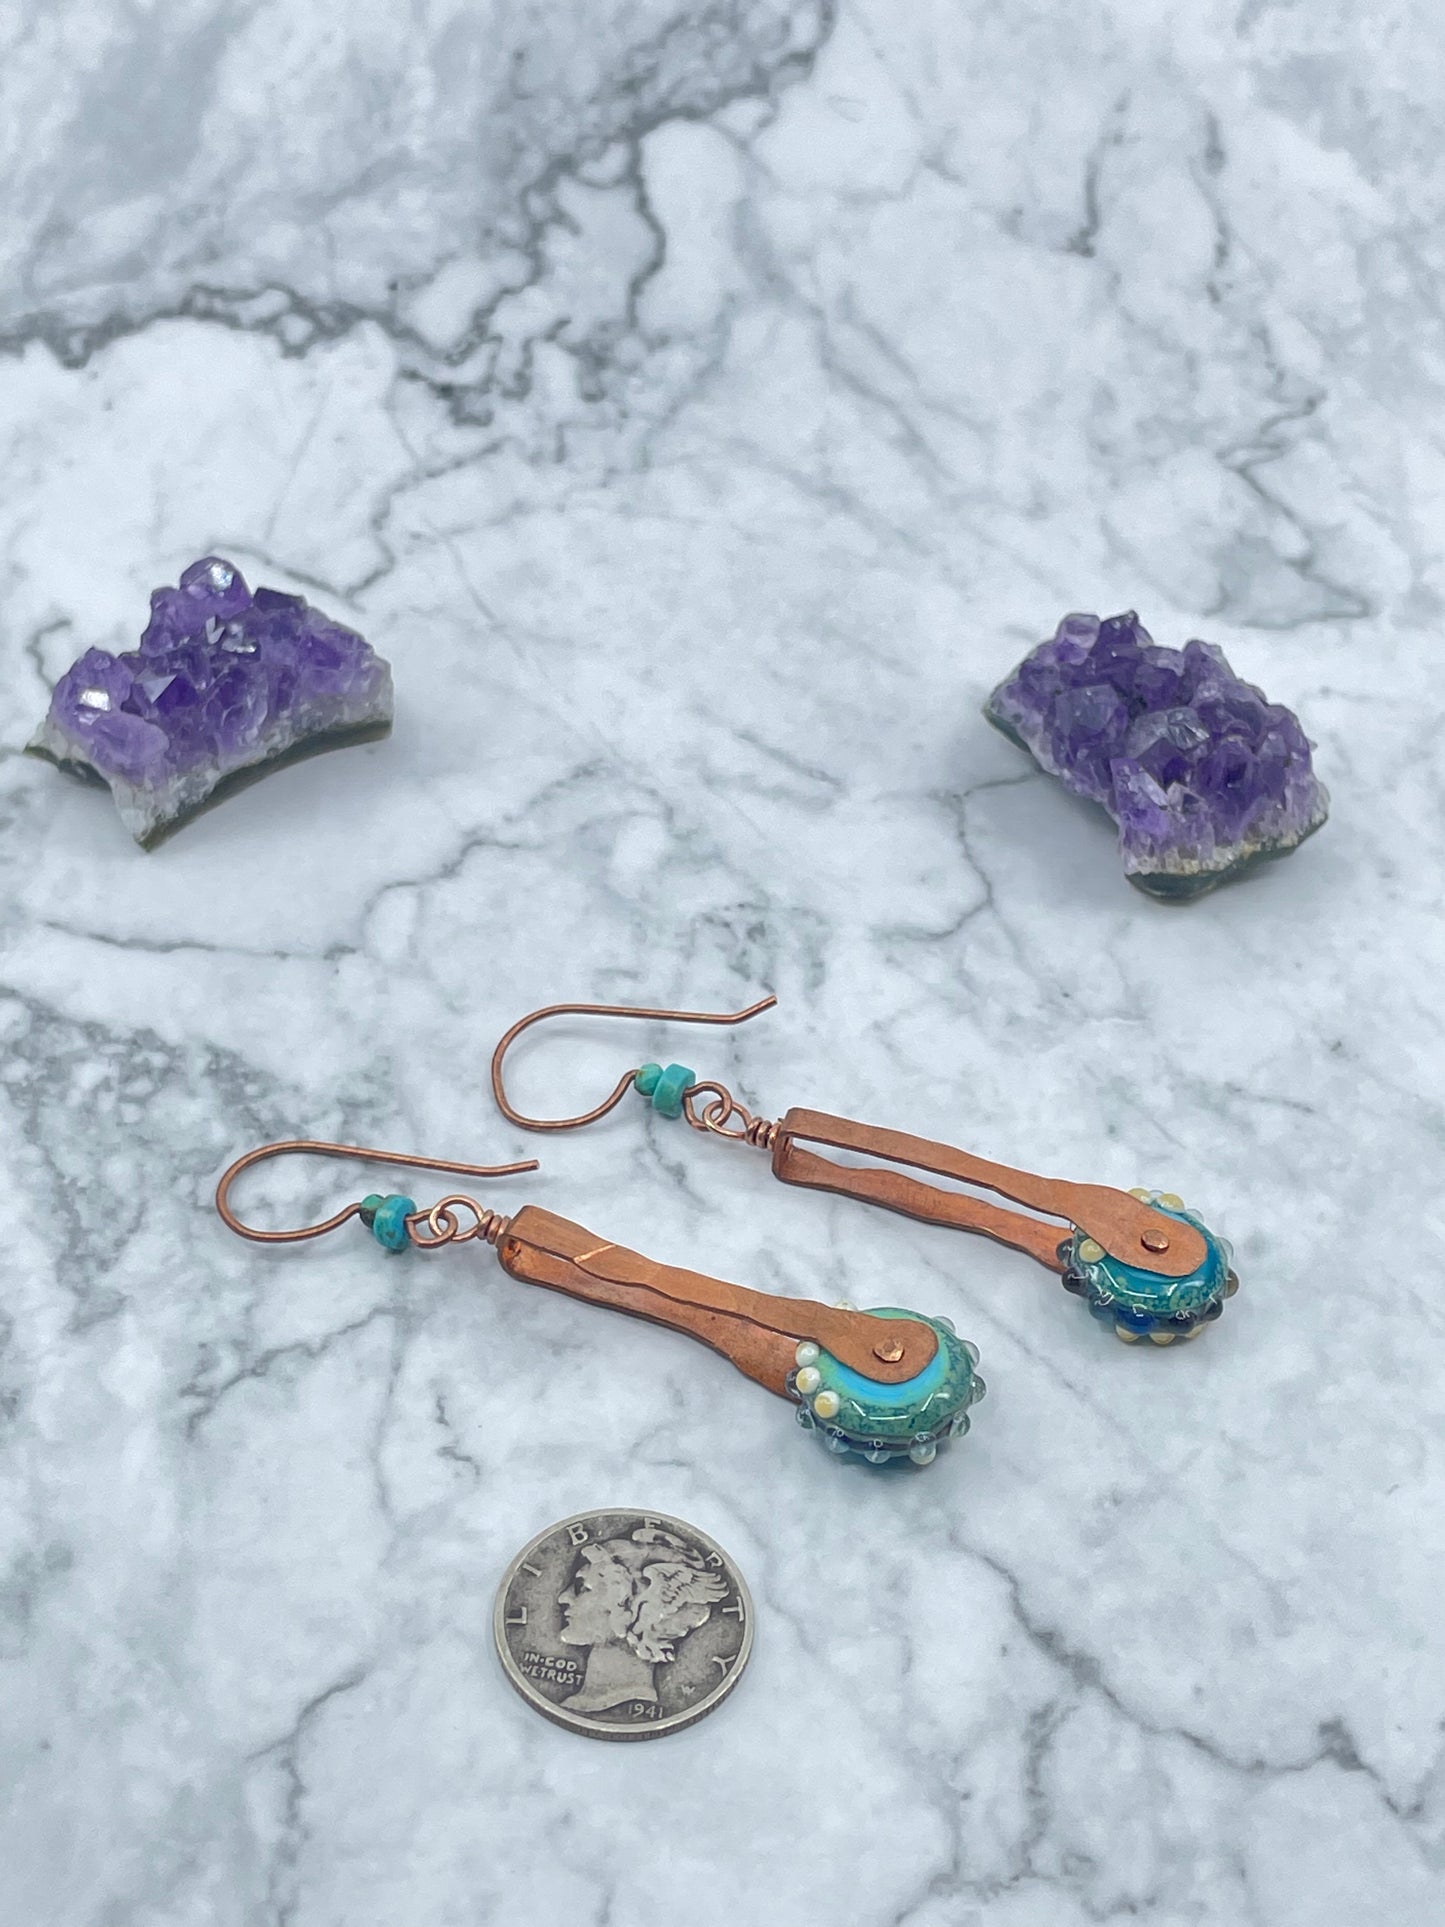 Turquoise and Lampwork Glass Earrings